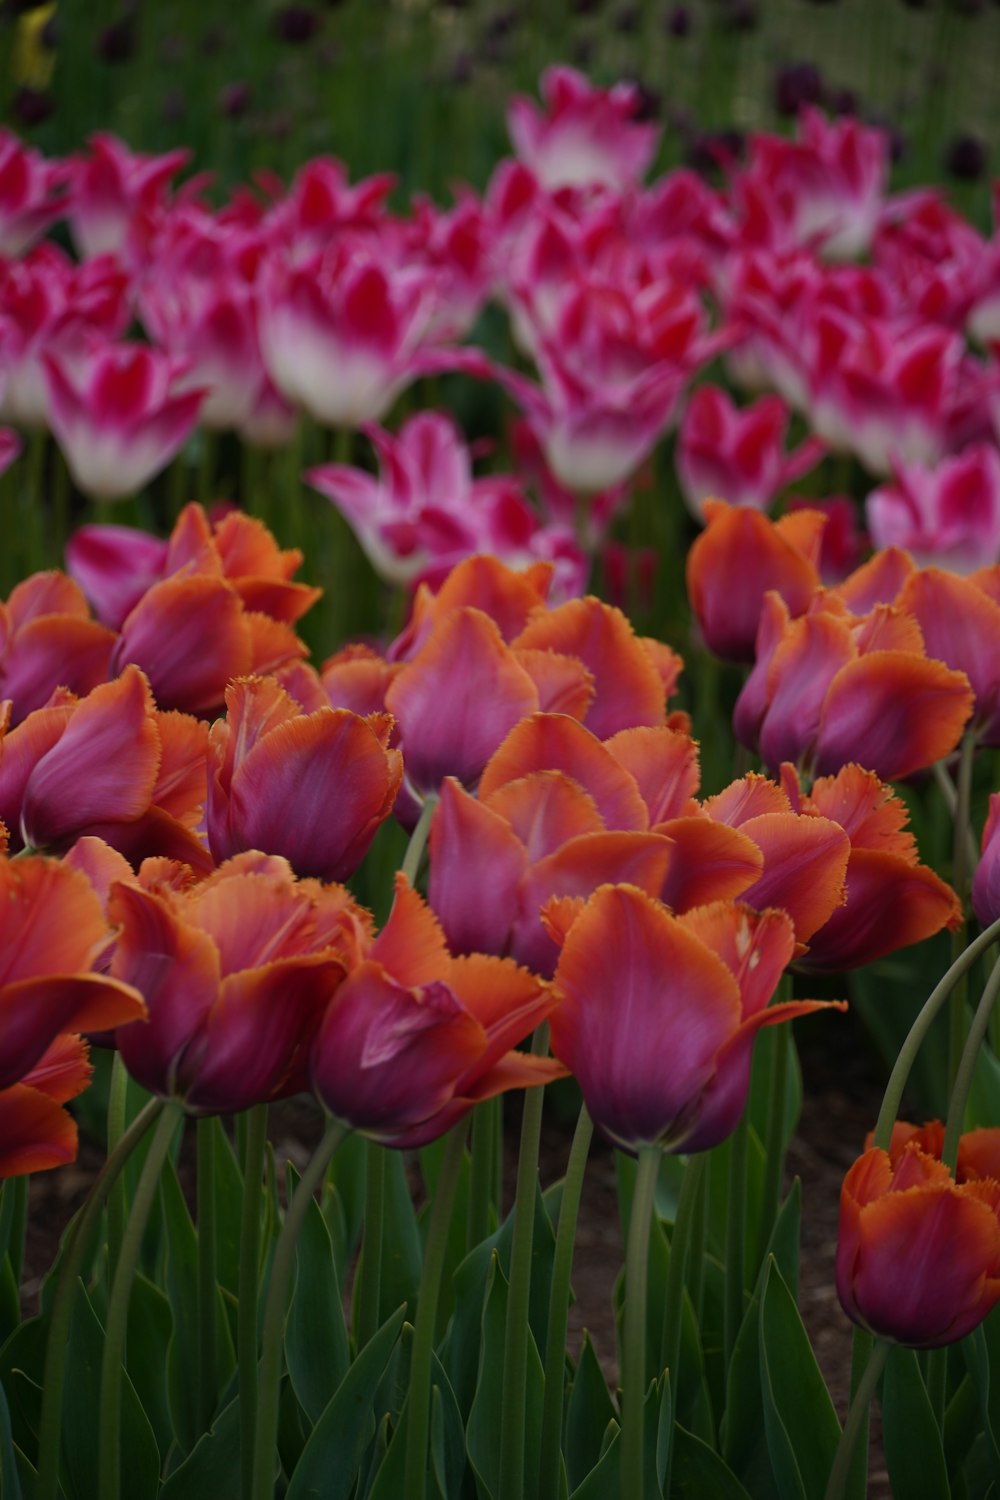 a field full of pink and orange tulips